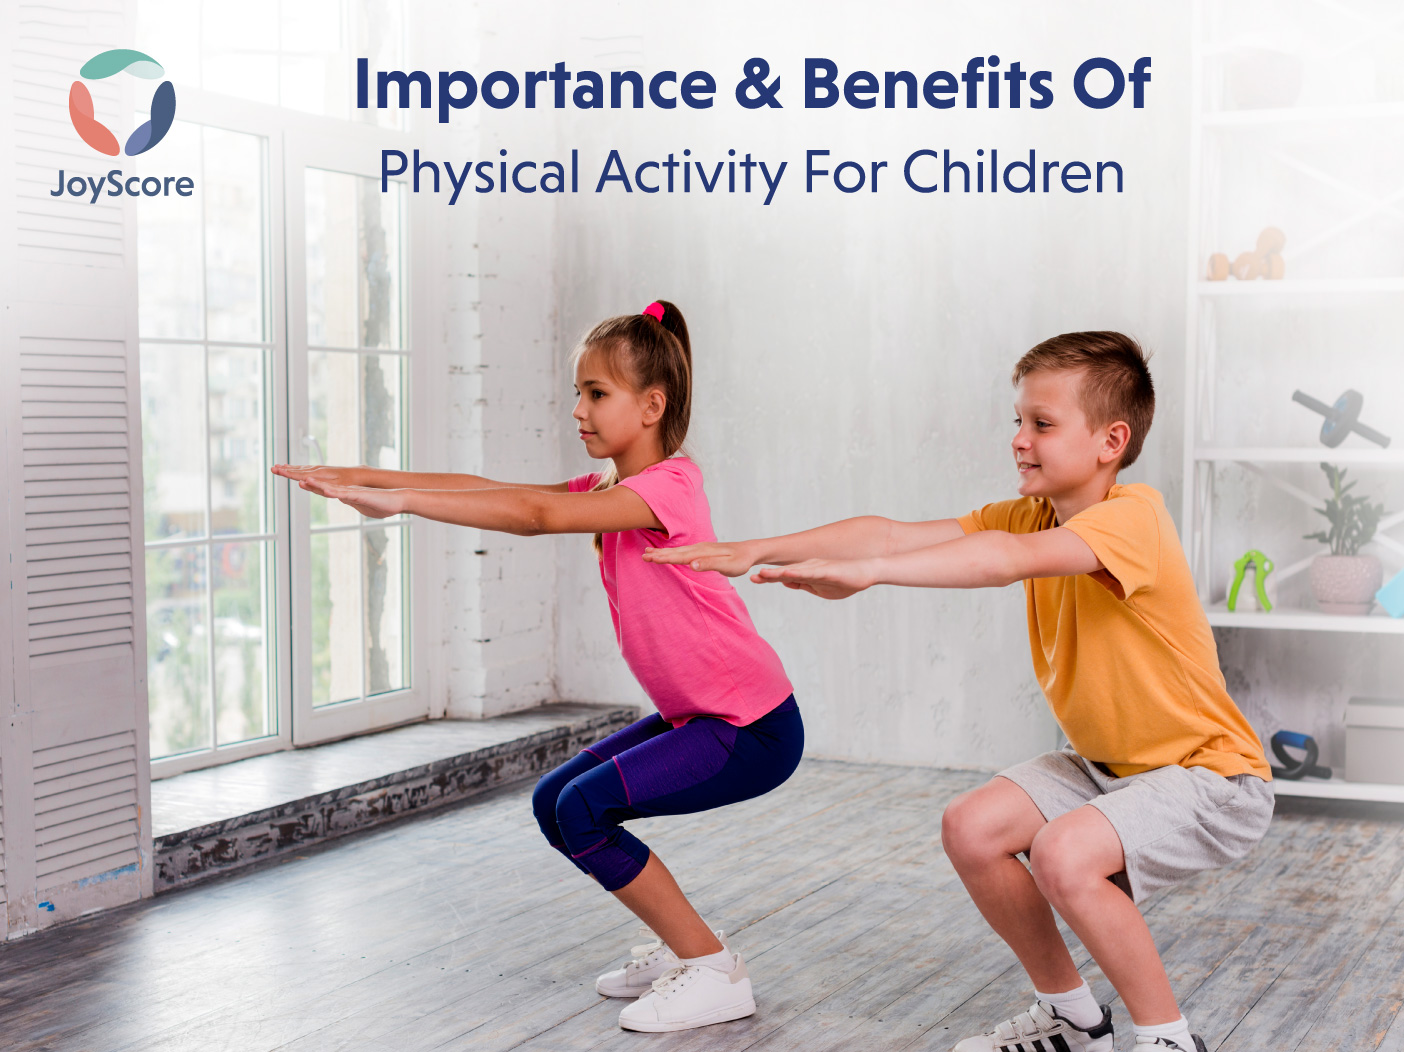 Importance and Benefits of Physical Activity for Children